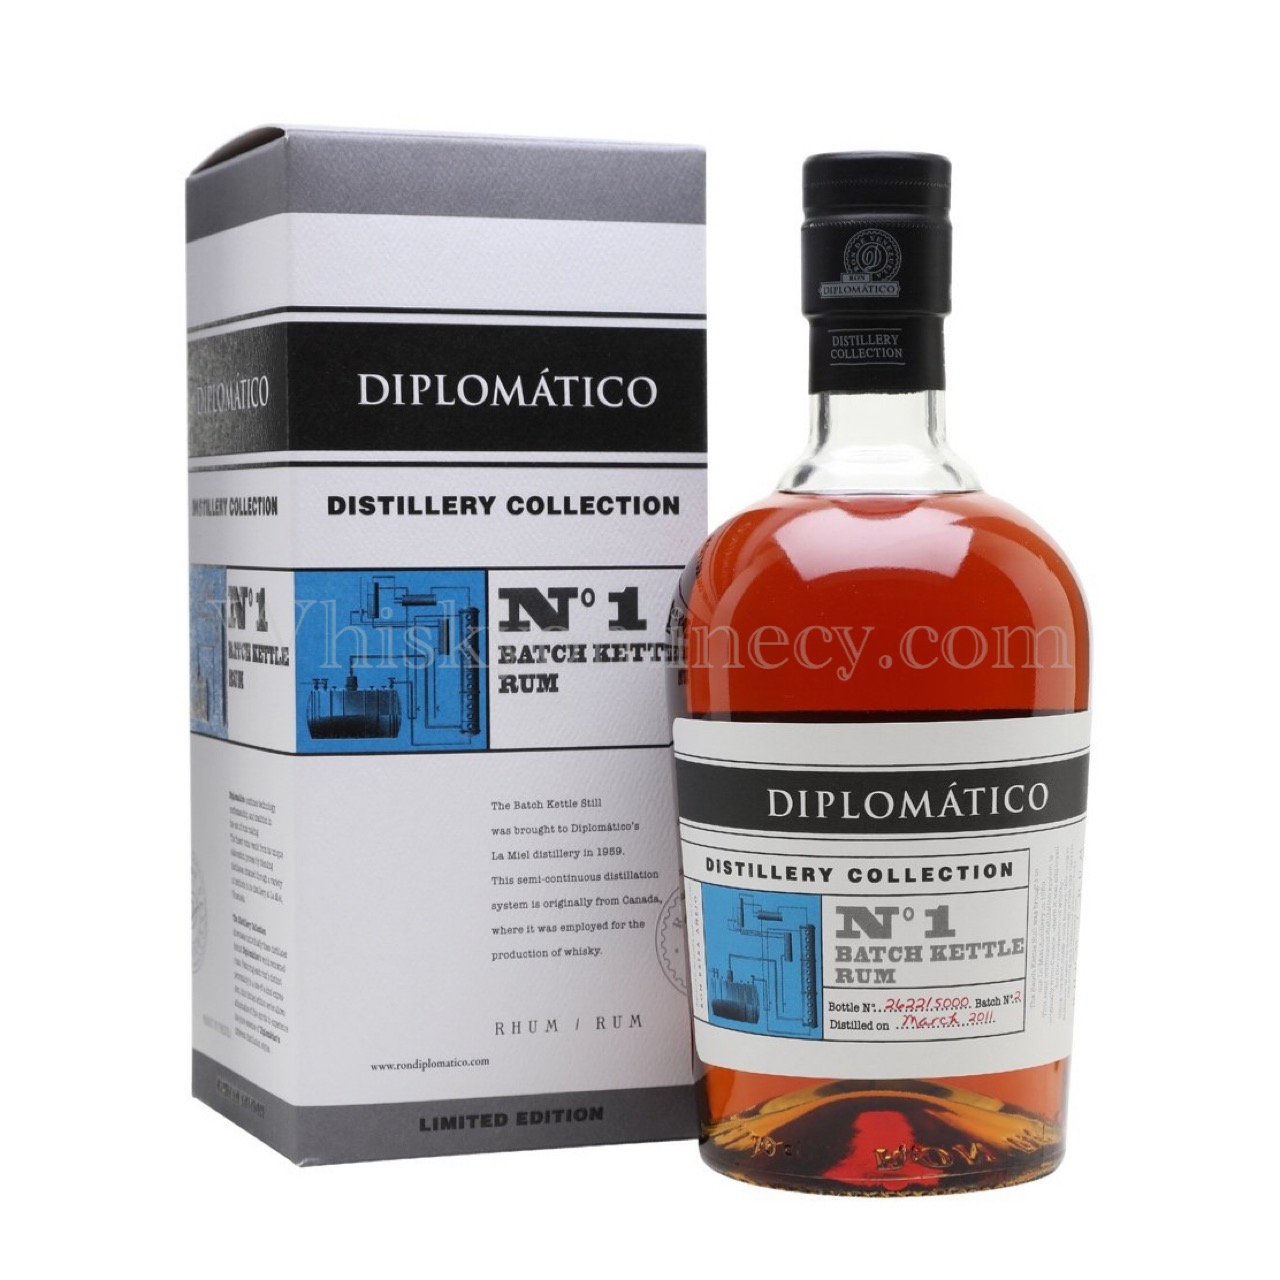 Whisky Online Cyprus - Diplomático No.1 Batch Kettle Rum Distillery  Collection (70cl, 47%)